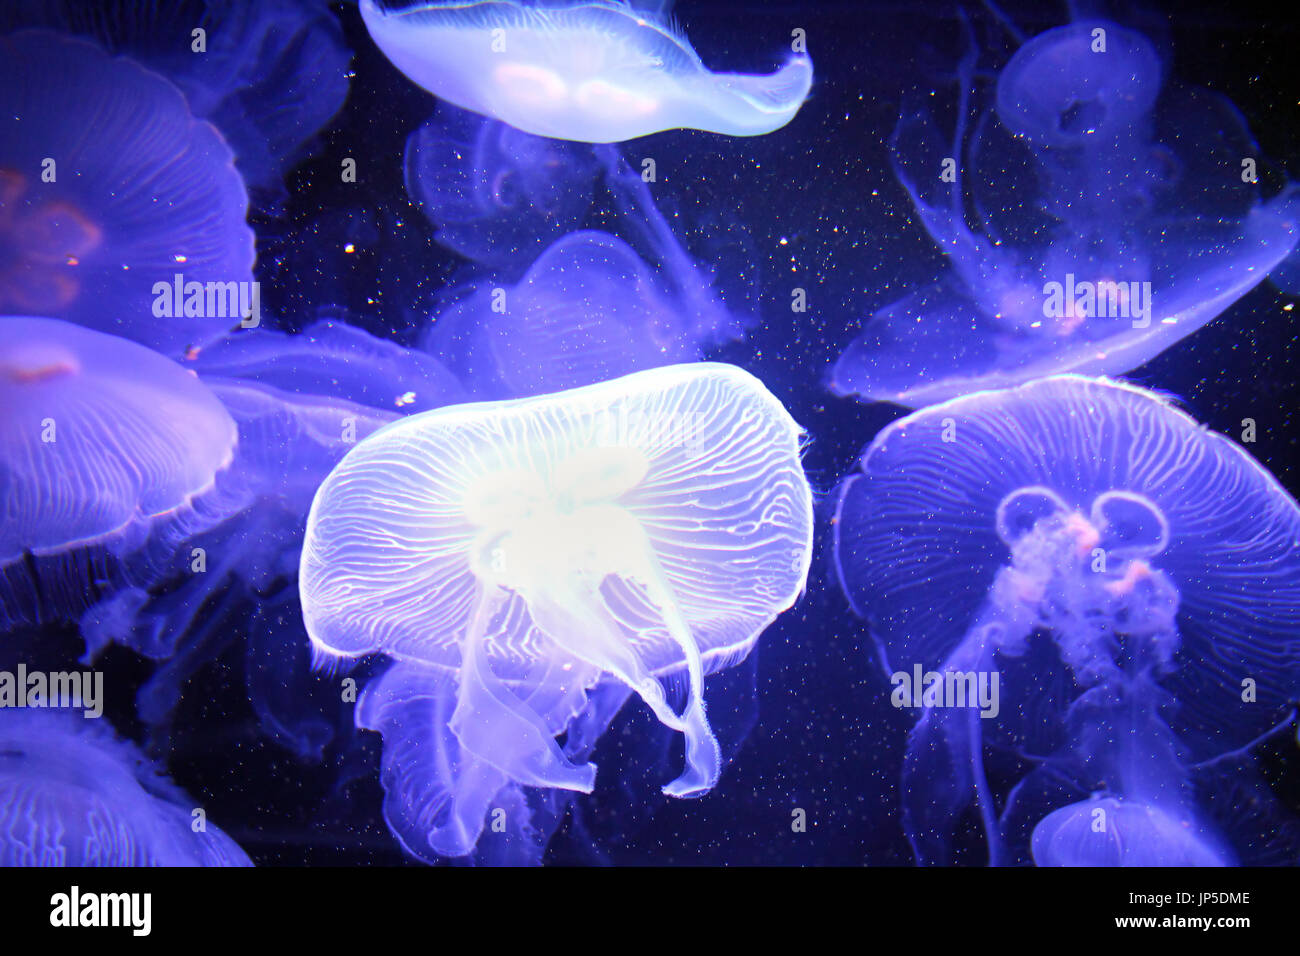 Transparent moon jellyfish illuminated with purple light swimming in the water Stock Photo